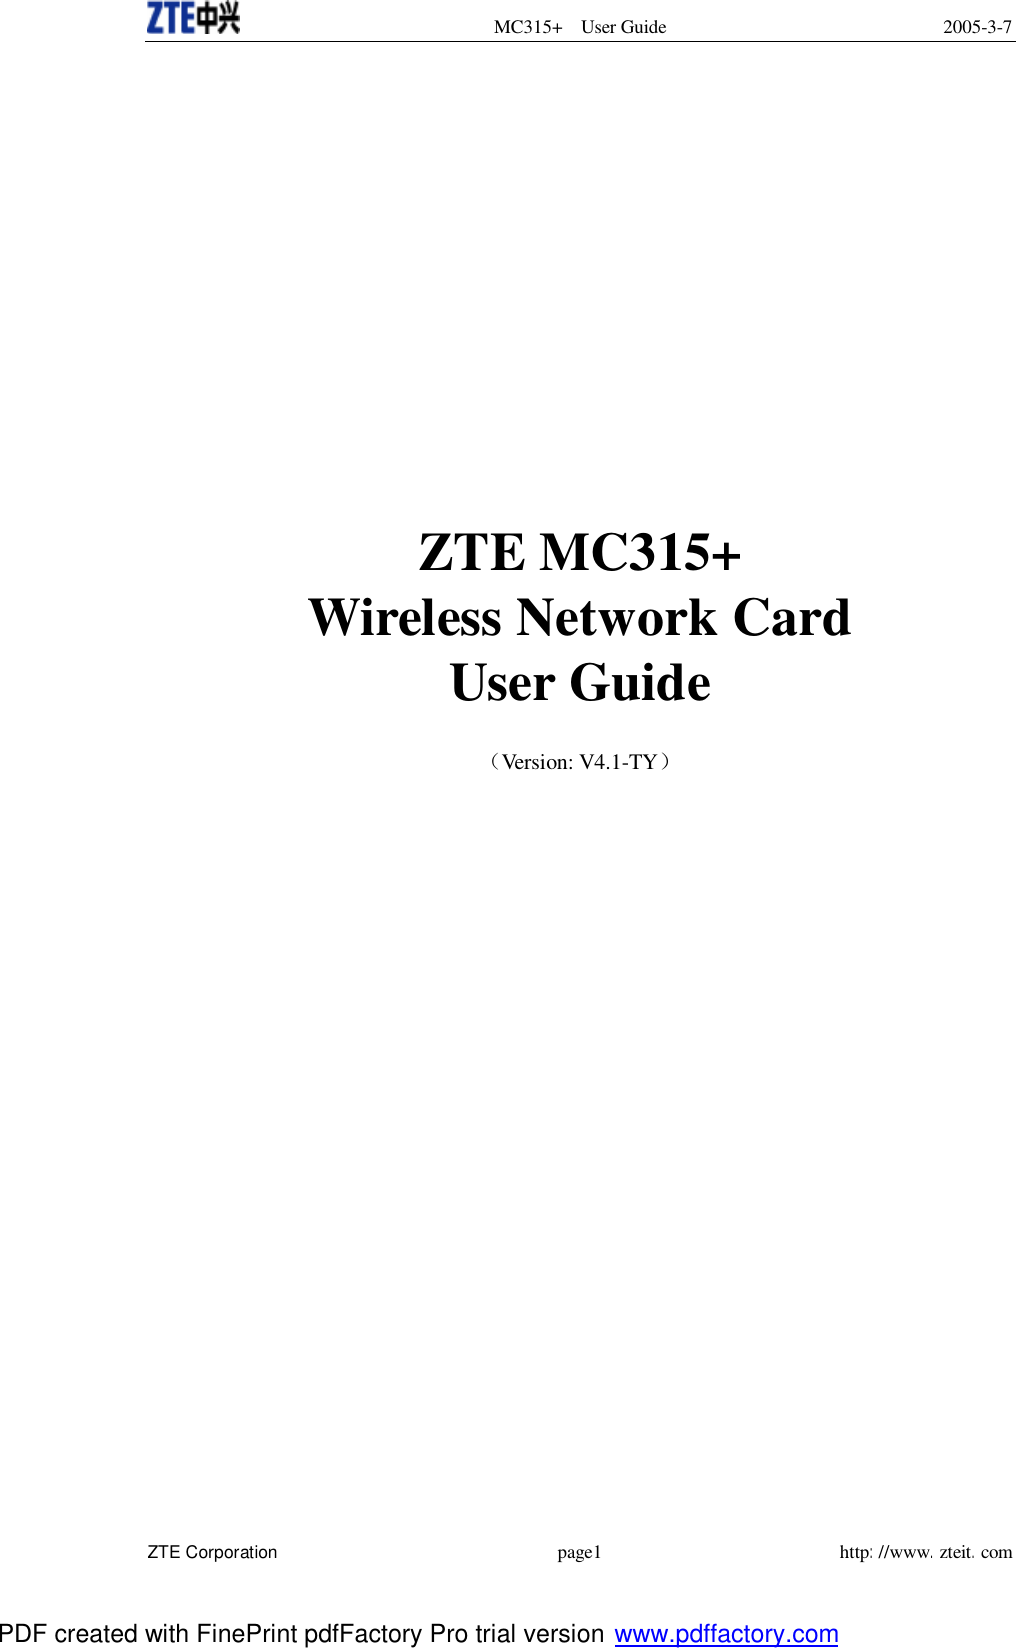  MC315+ User Guide 2005-3-7  ZTE Corporation page1 http://www.zteit.com               ZTE MC315+  Wireless Network Card User Guide  （Version: V4.1-TY）      PDF created with FinePrint pdfFactory Pro trial version www.pdffactory.com